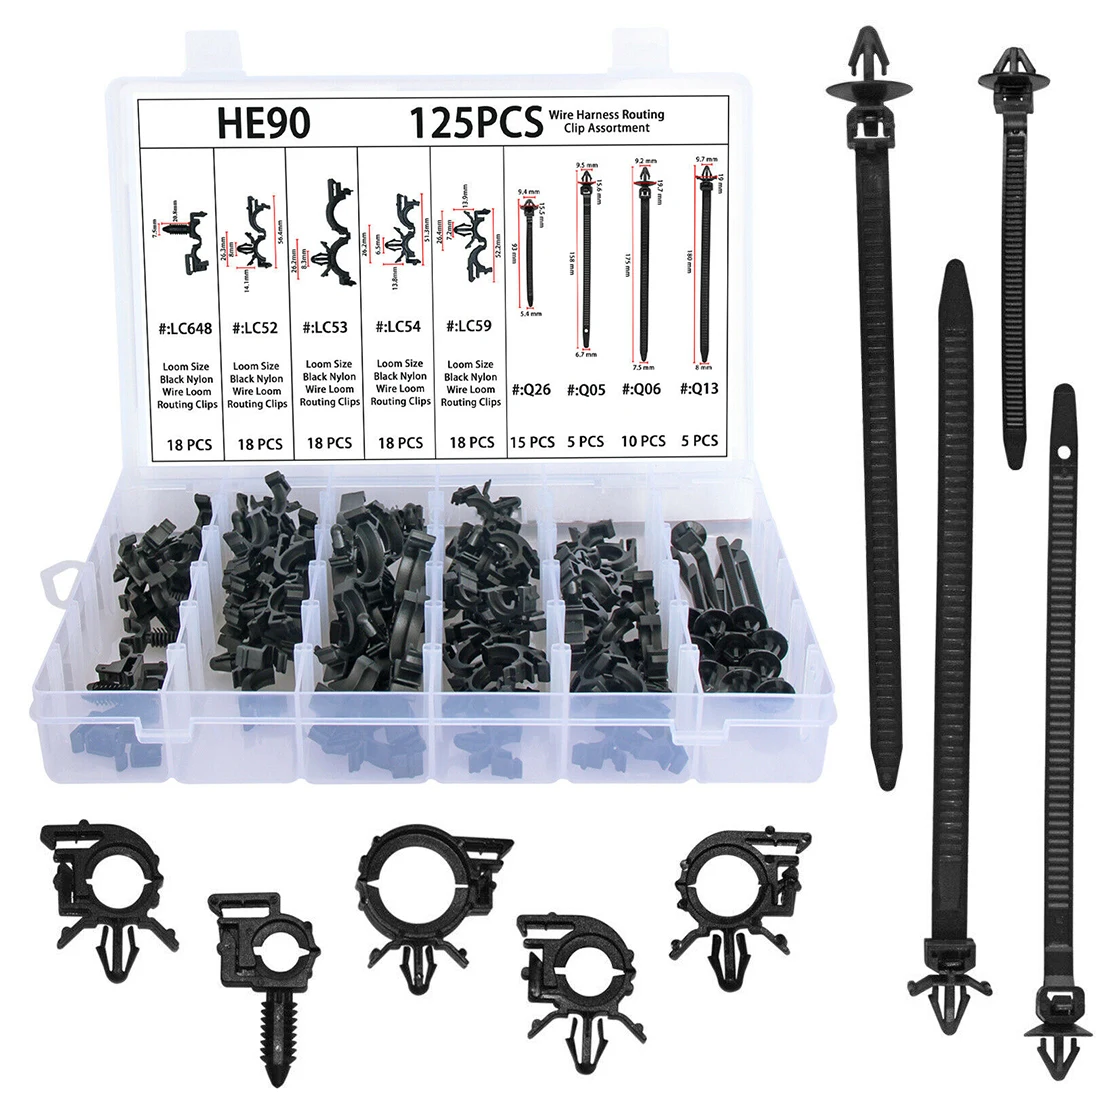 

125pcs/Set Car Nylon Wire Harness Routing Clip Retainer Cable Tie Assortment Black Fit For GM Honda Mazda